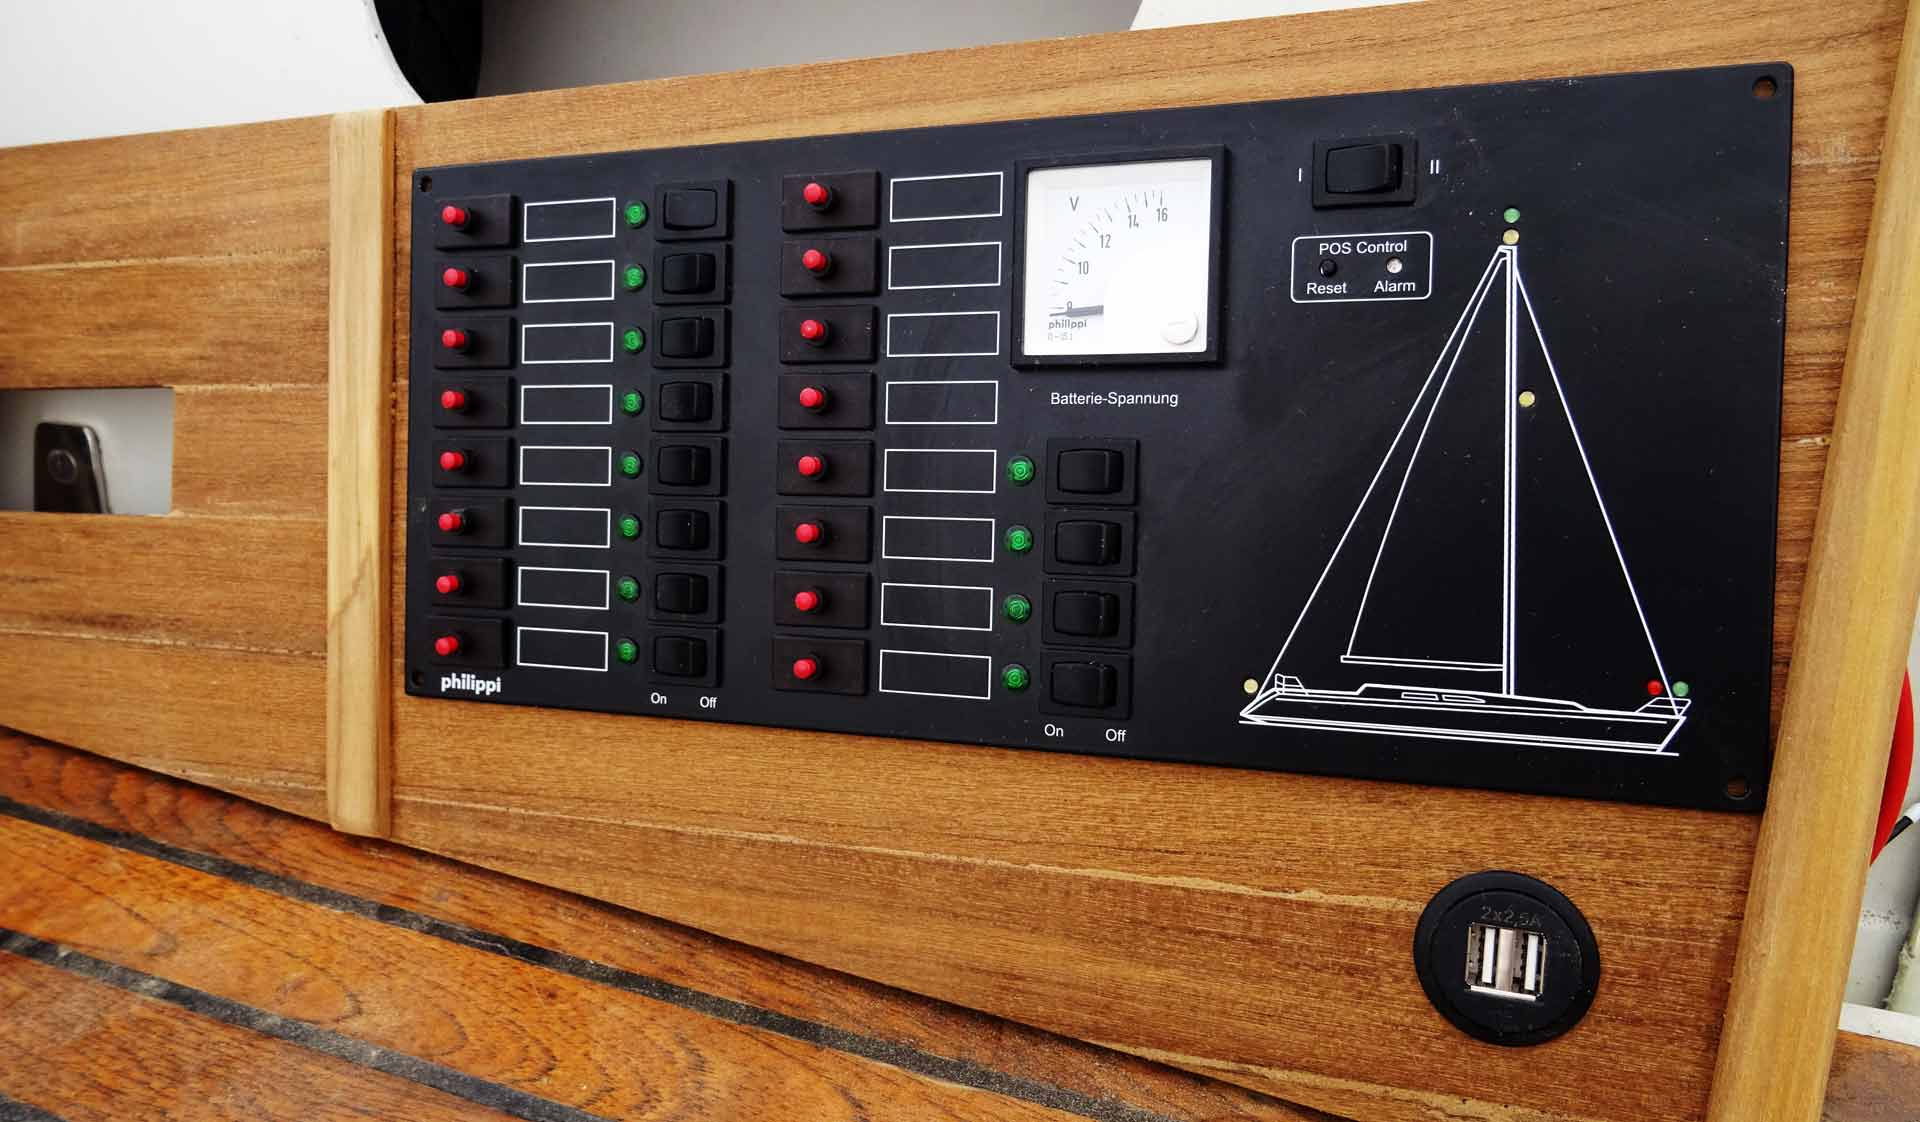 Just WOW - the All new Philippi STV Switch Panel and the USB-Port